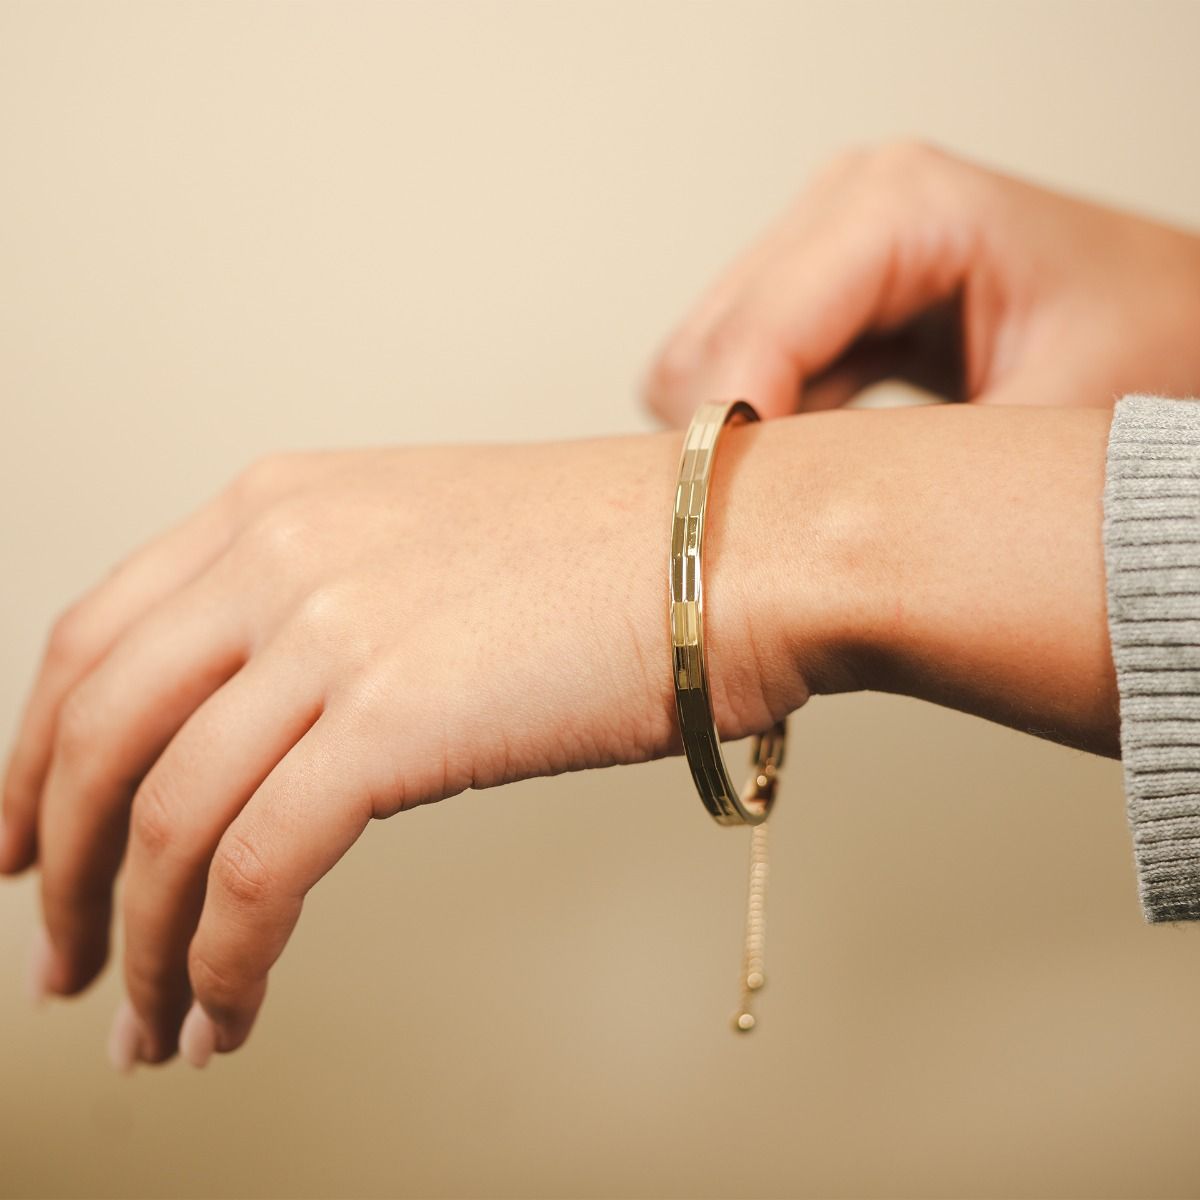 Inspired by the bustle and fun of the city, this striking bangle allows you to add style to any outfit. Featuring a modern take on a classic friendship bracelet design, with a faceted finish to accentuate the shine. A sleek toggle fastening allows the ban